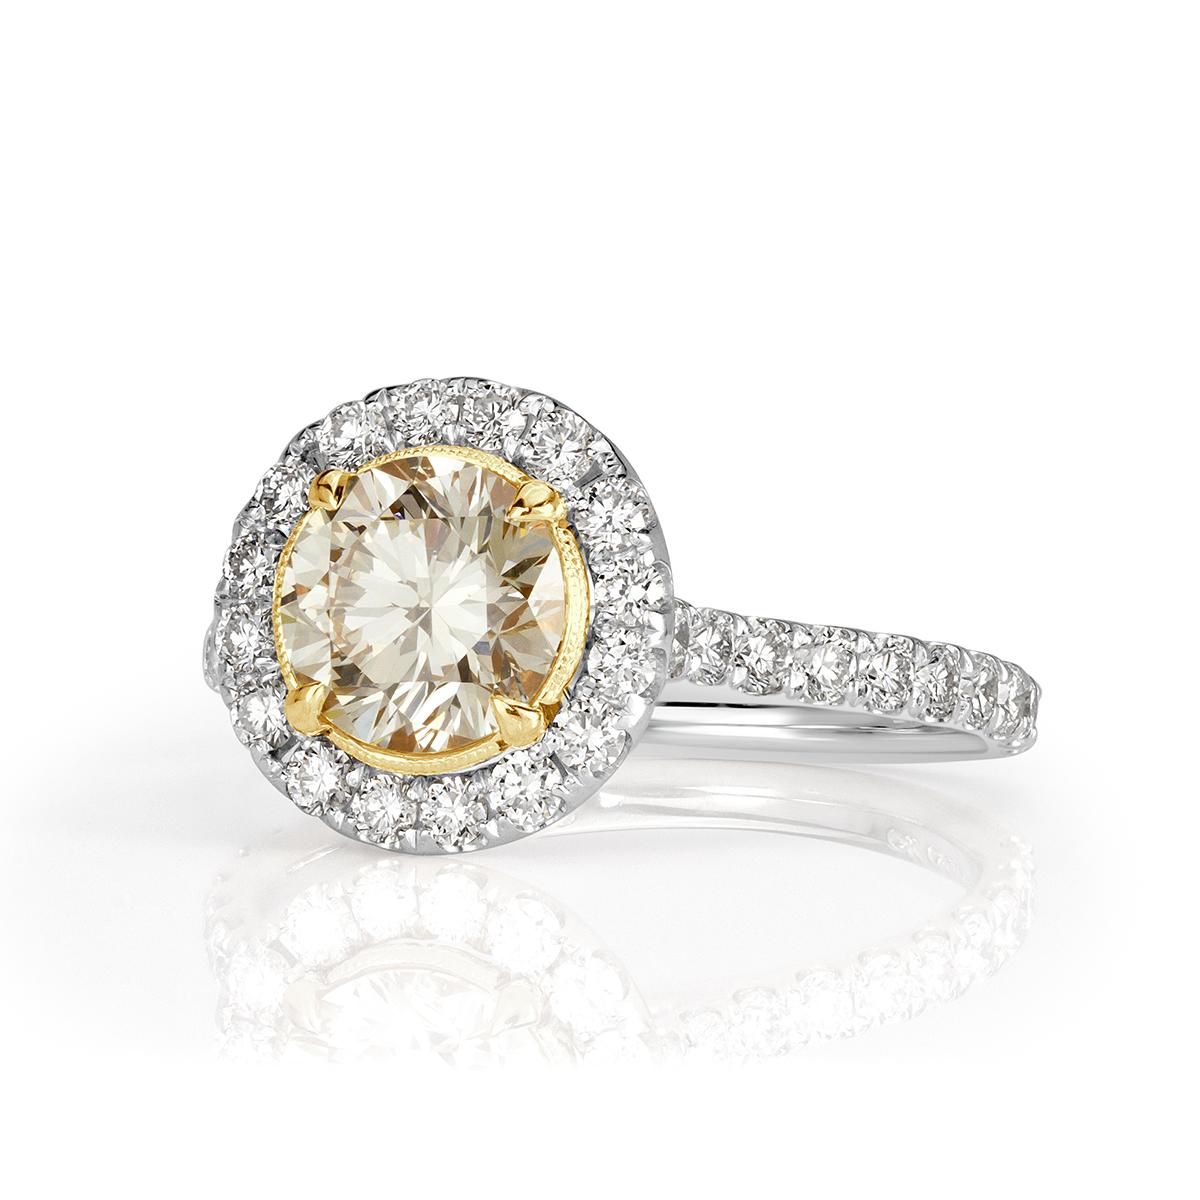 This lovely diamond engagement ring showcases a 1.22ct round brilliant cut center diamond, GIA certified at Fancy Light Yellow-VVS1. It is accented by a halo of peerless white round brilliant cut diamonds as well as one row of gleaming diamonds